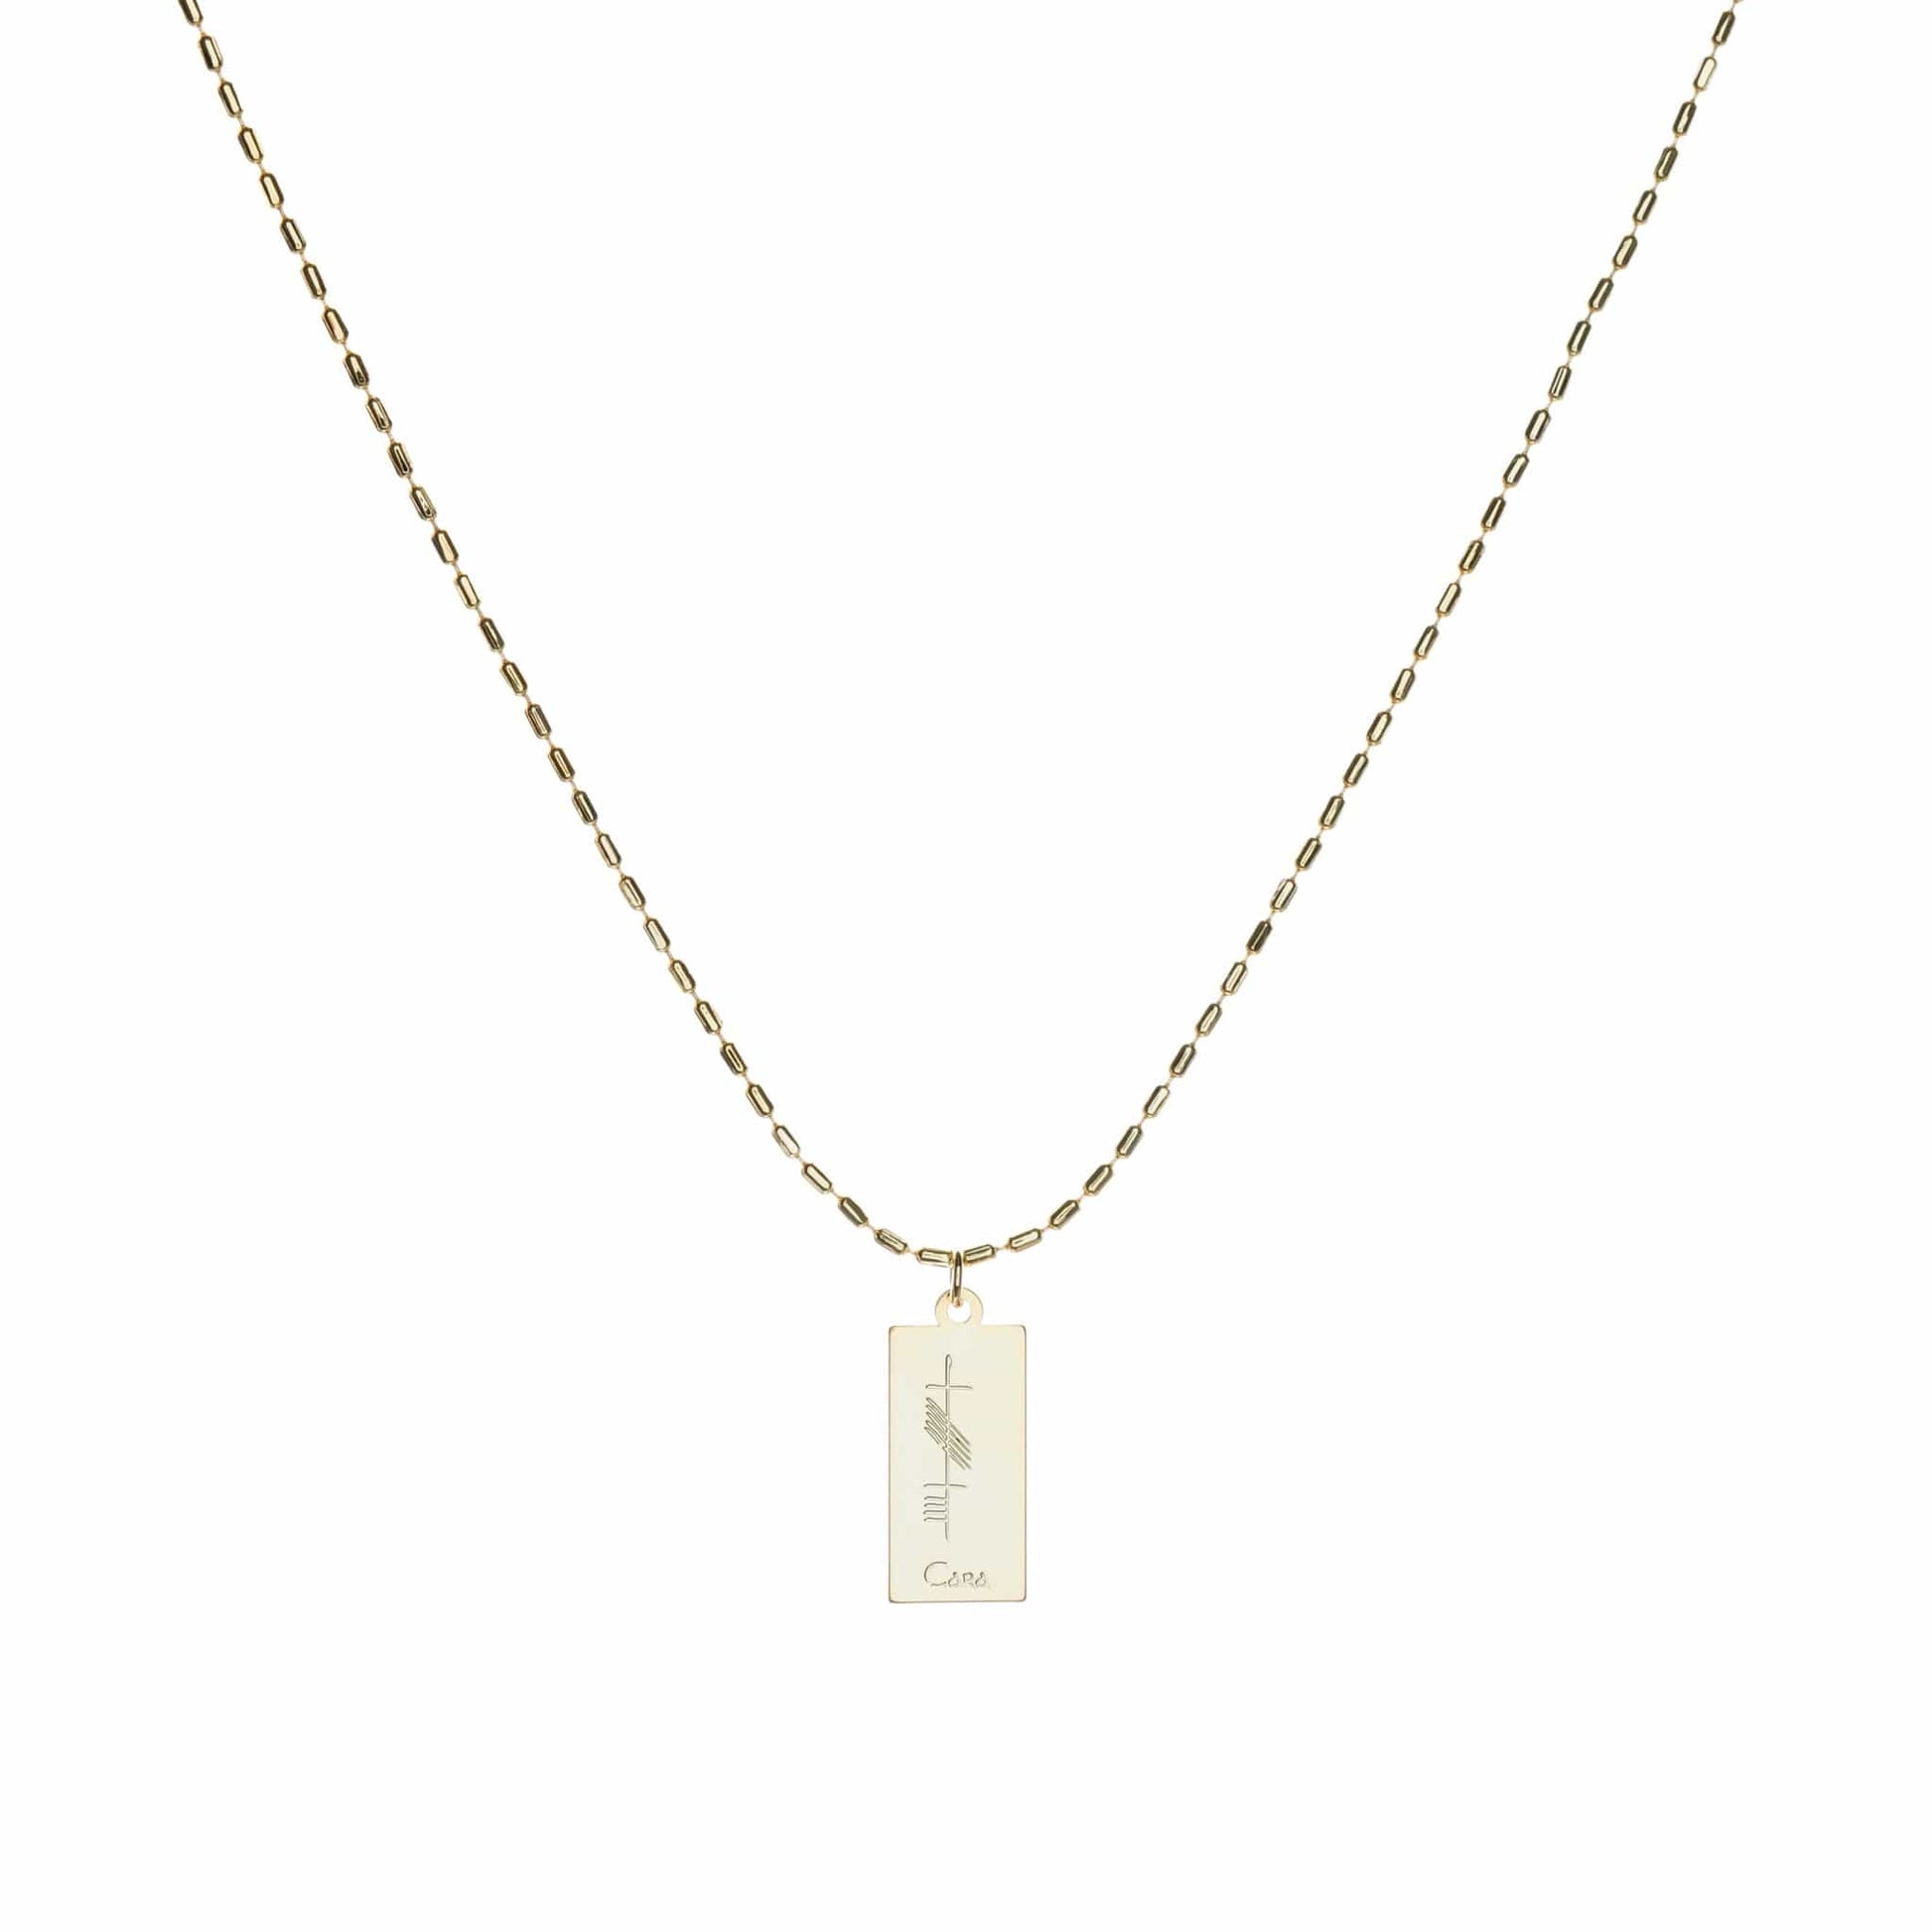 celtic ogham necklace from Ireland